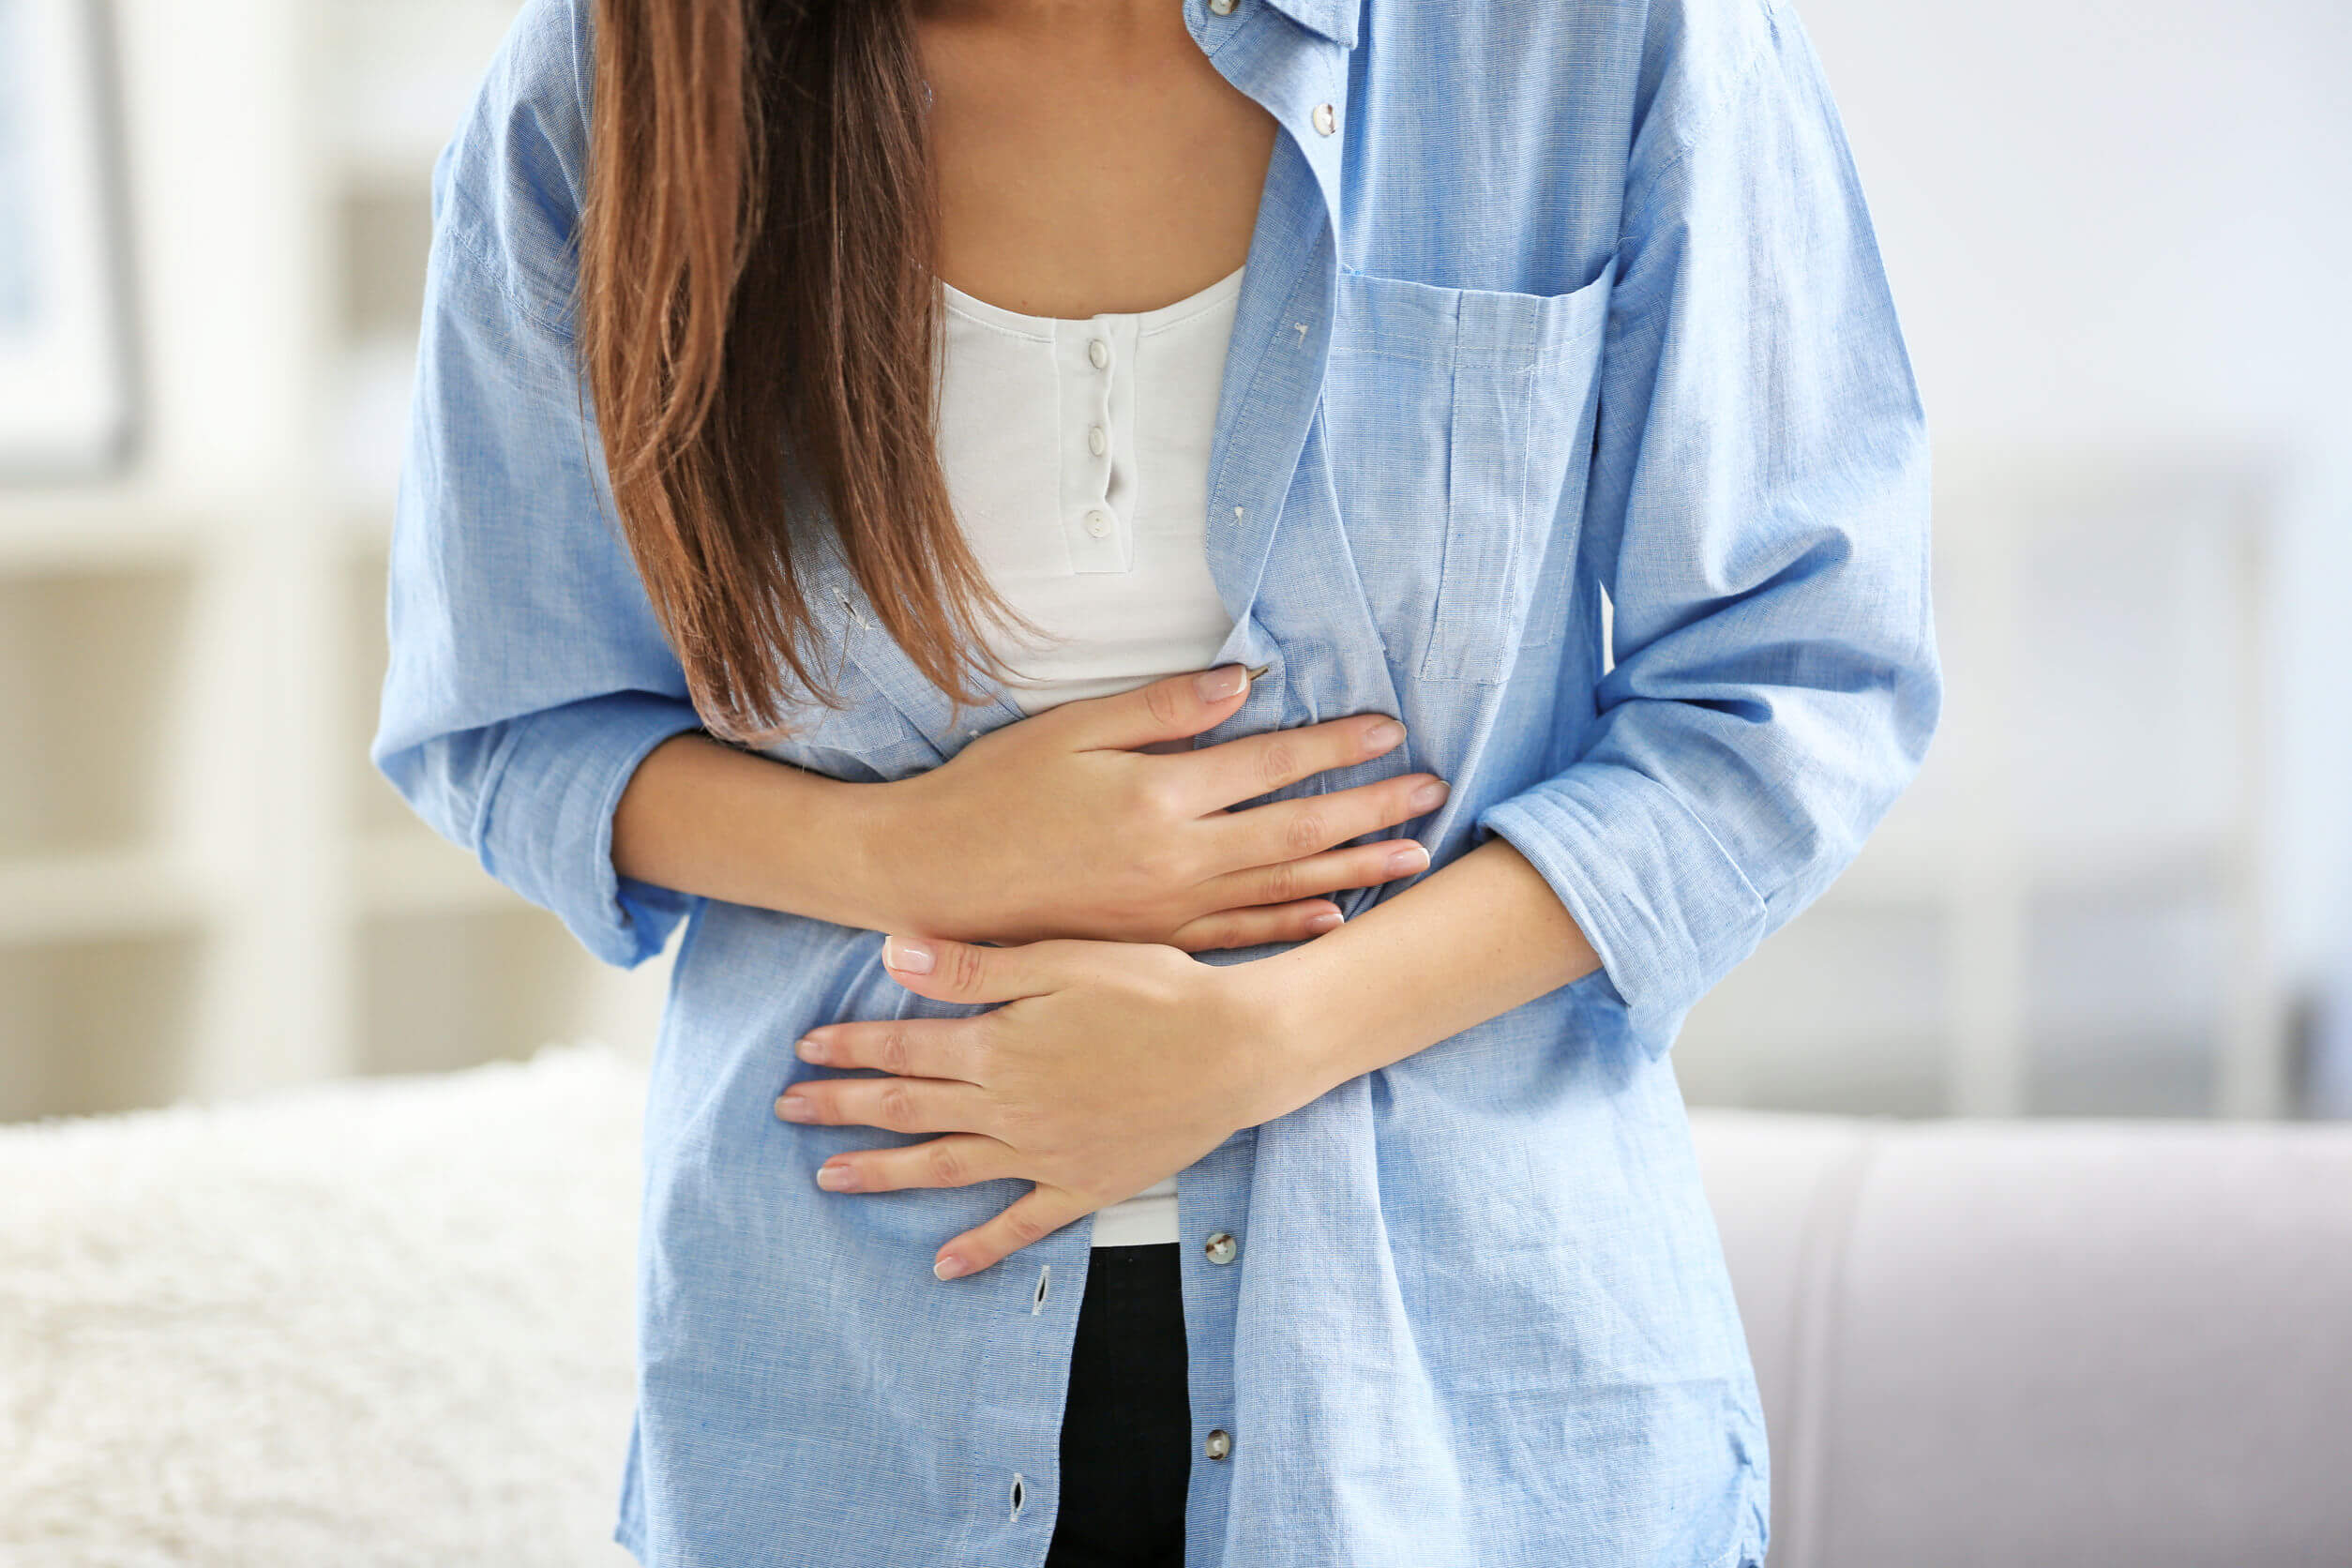 Leaky gut syndrome is complex.